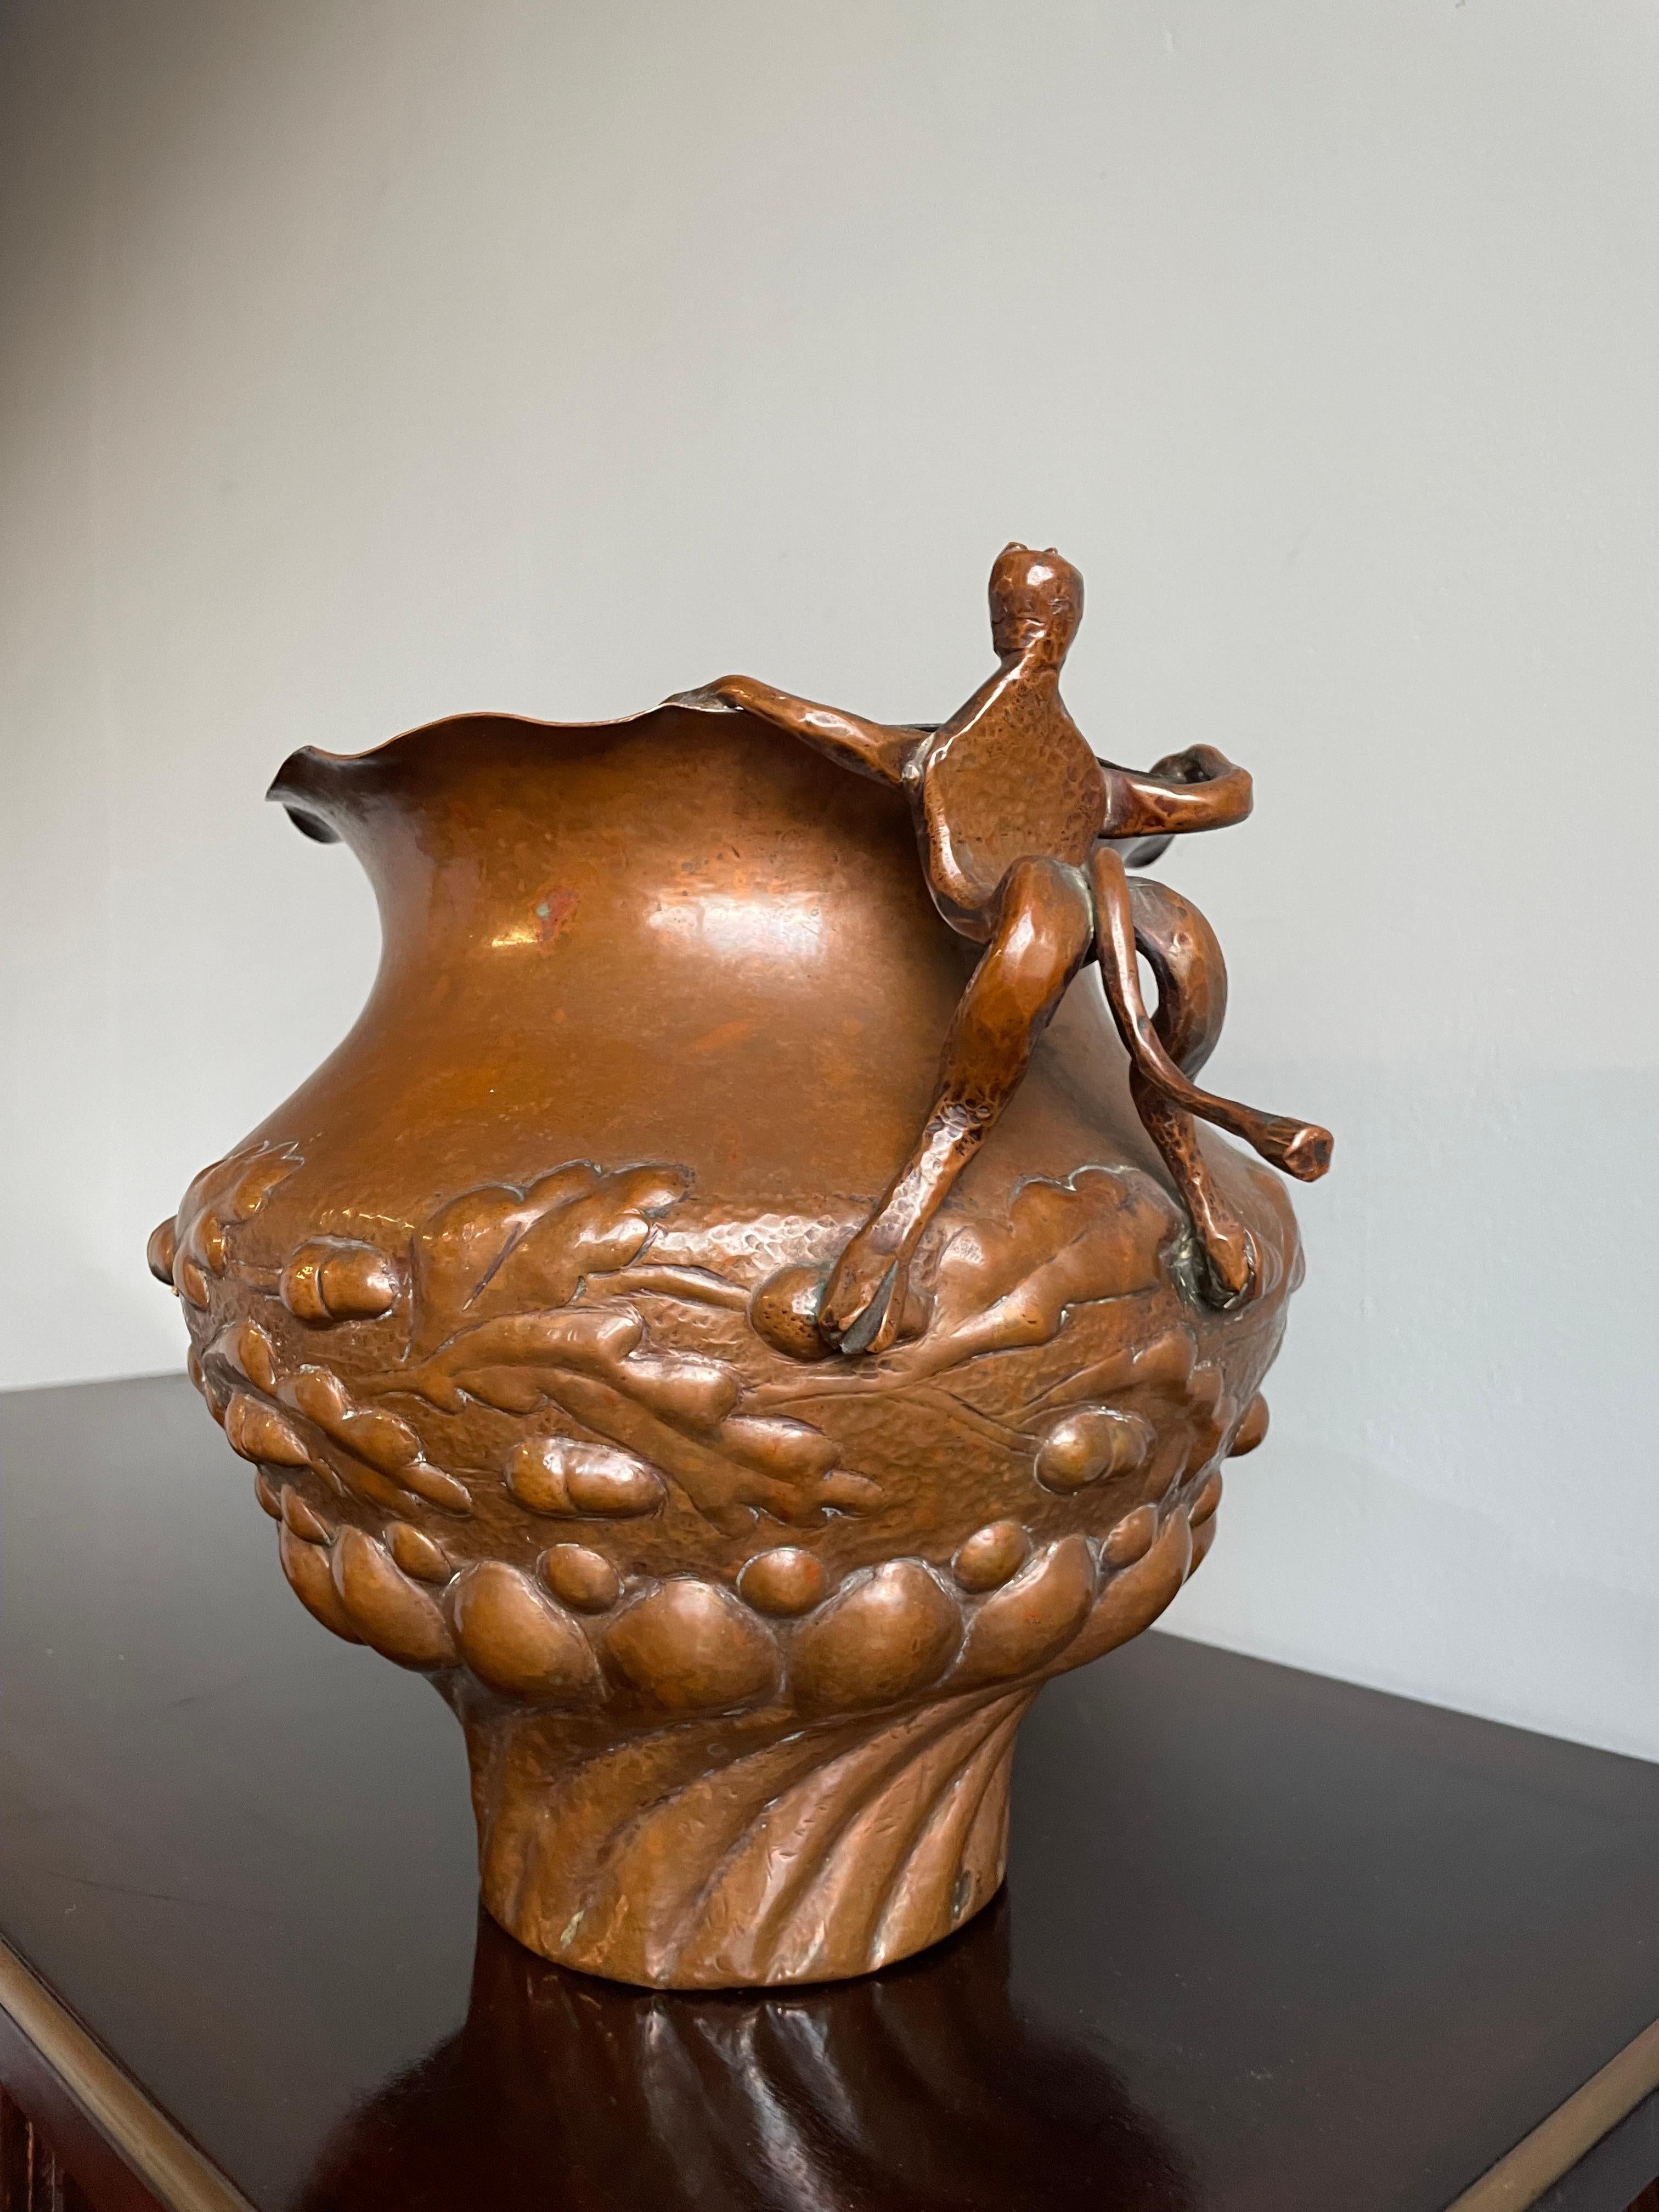 Unique Mid 1800s Embossed Copper Planter / Vase with Satyr Sculptures as Handles For Sale 4